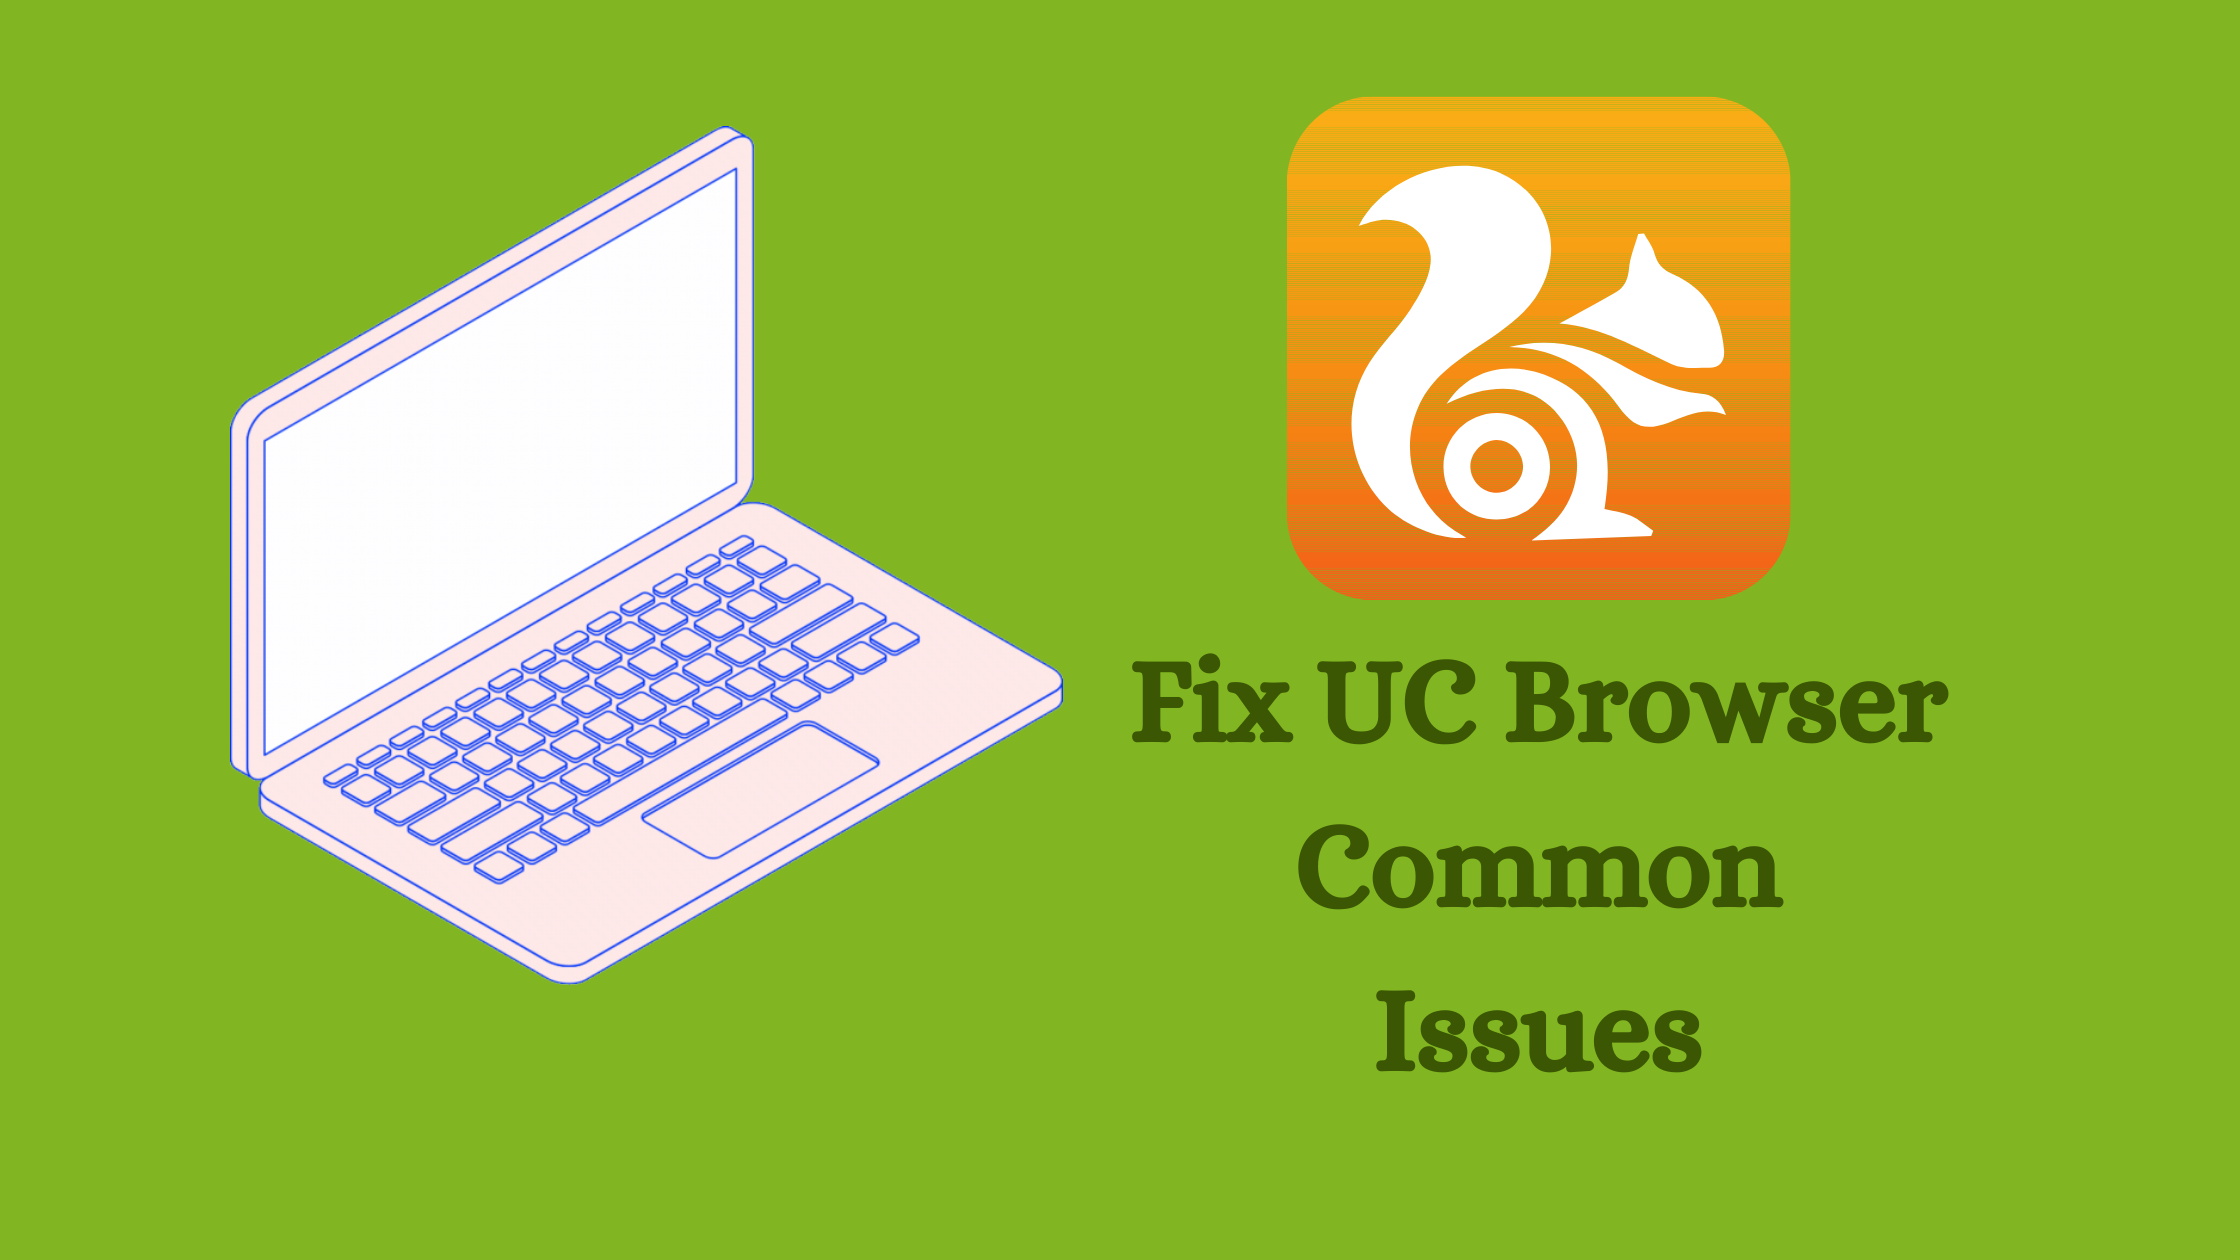 Fix UC Browser Common Issues